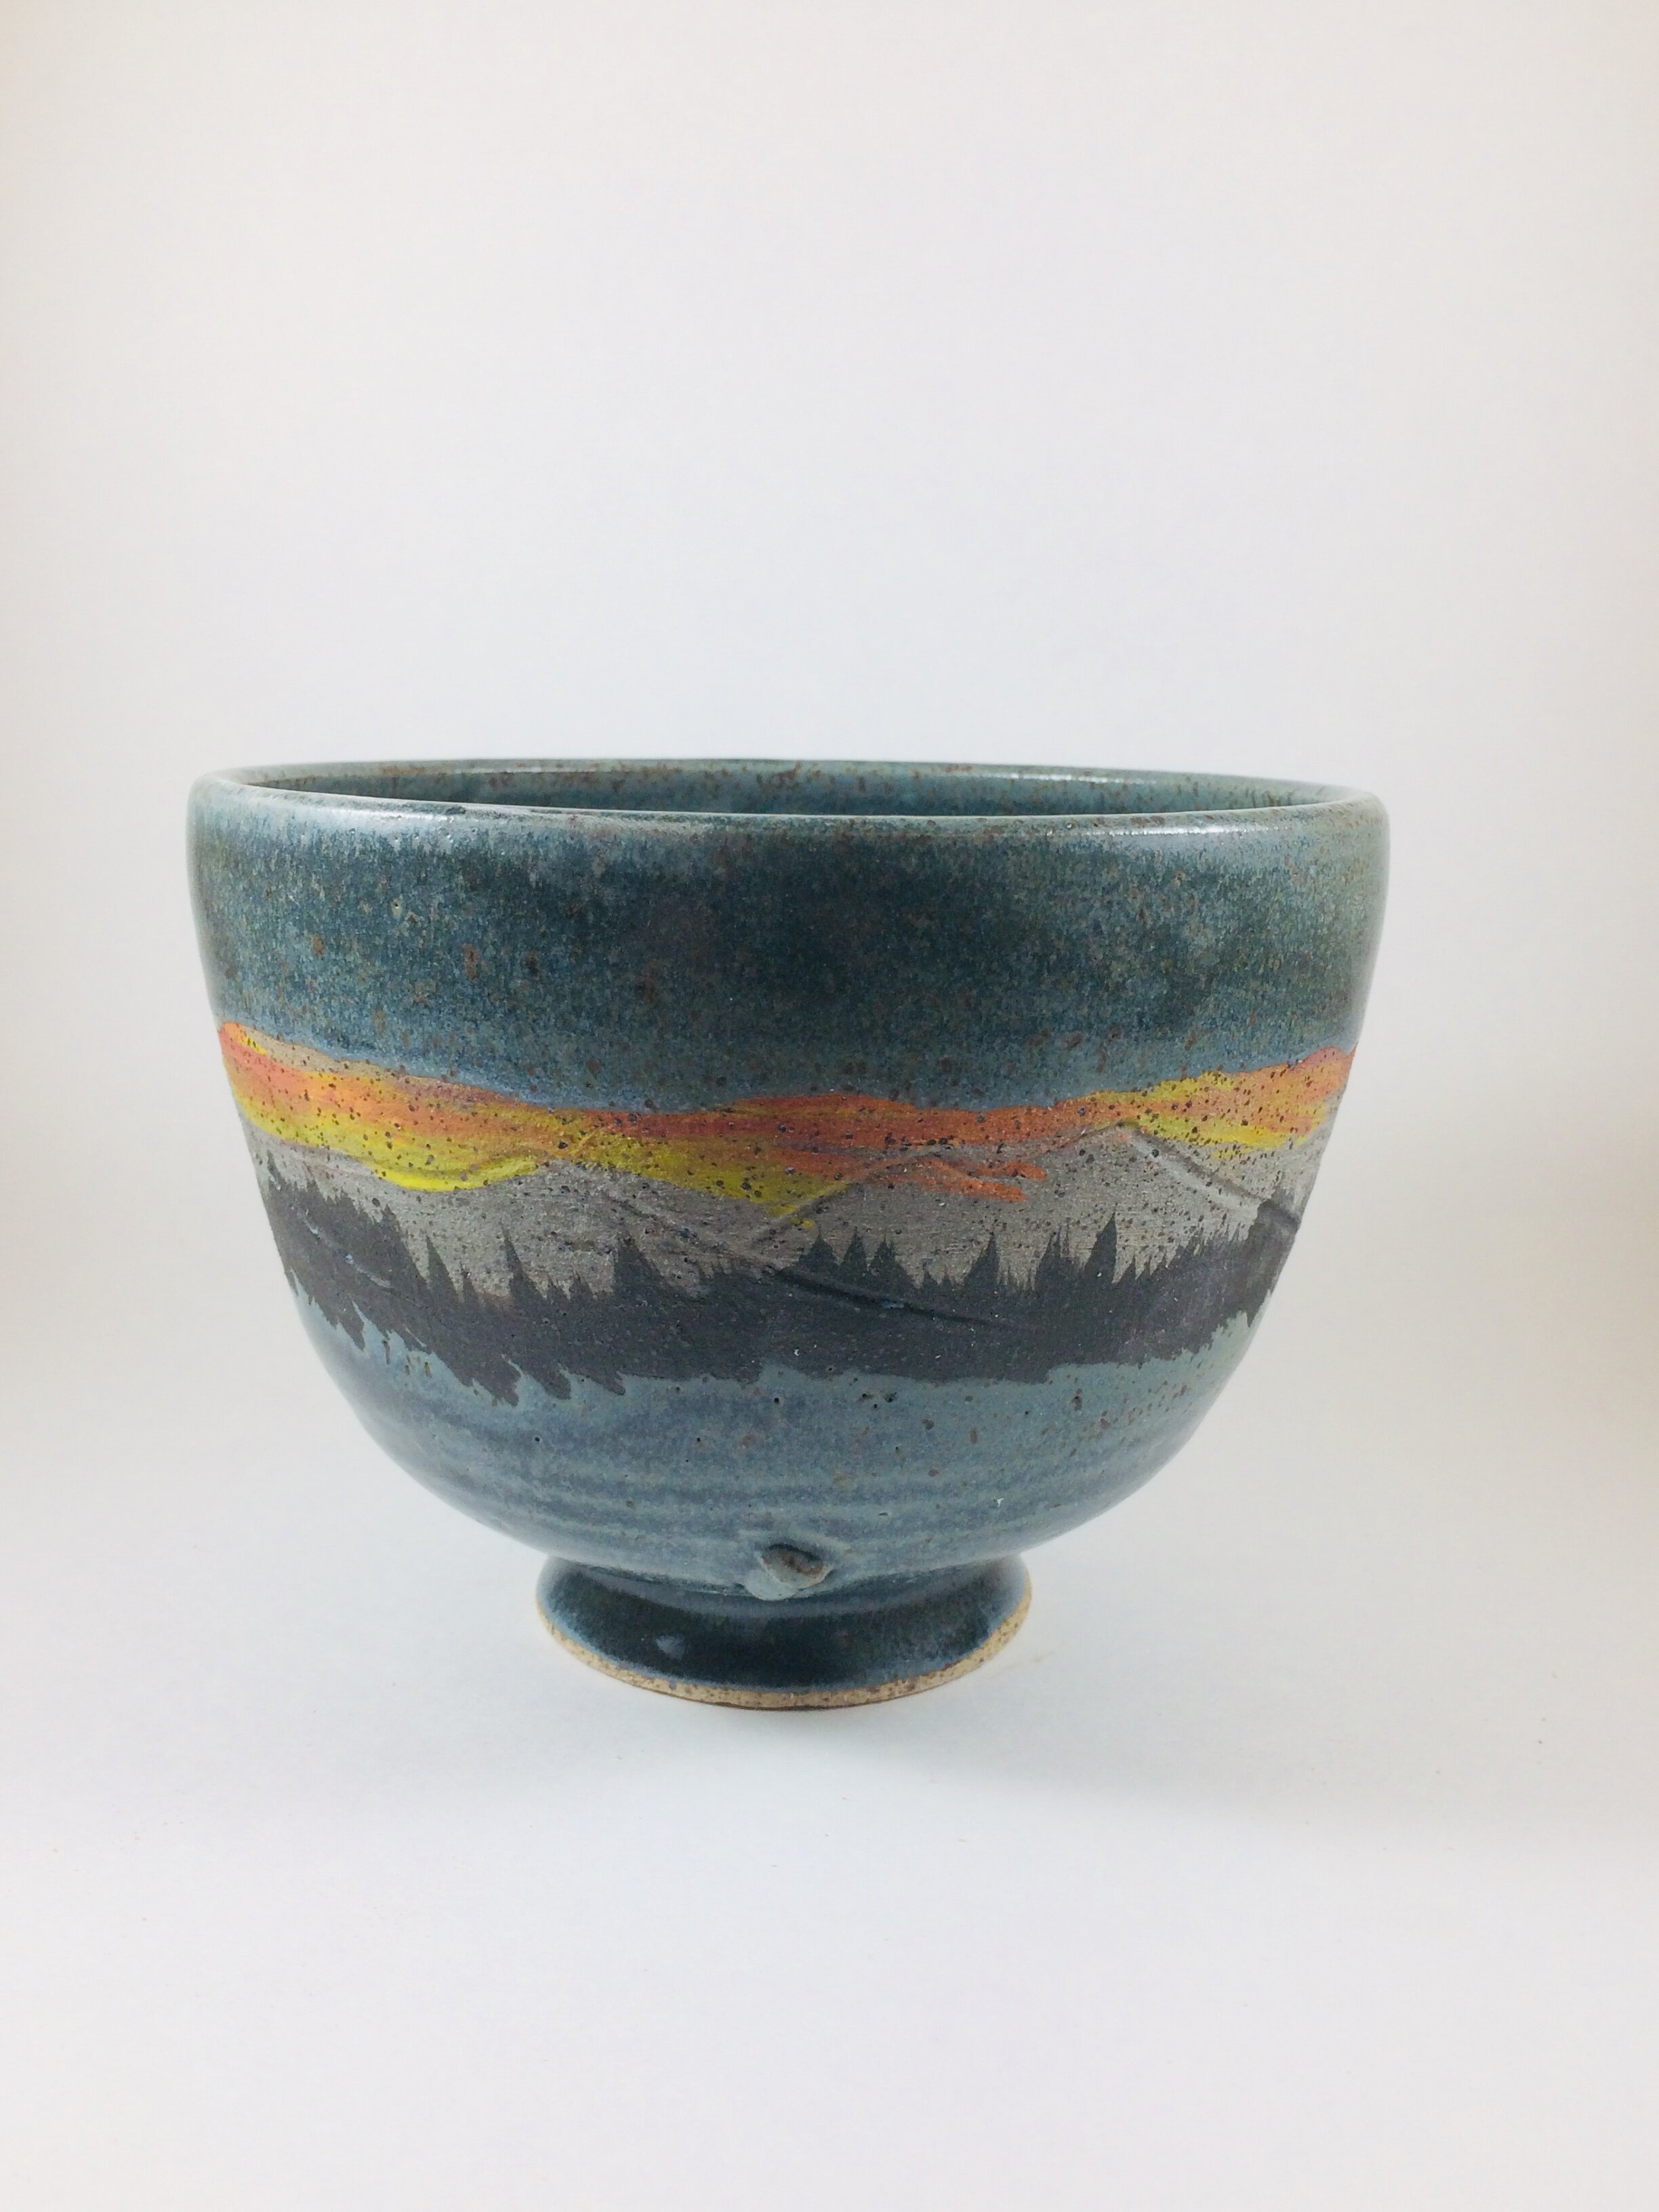 Mountain Pattern  bowl handcrafted by Michael Gibbons of Nutfield Pottery, Derry, NH, USA